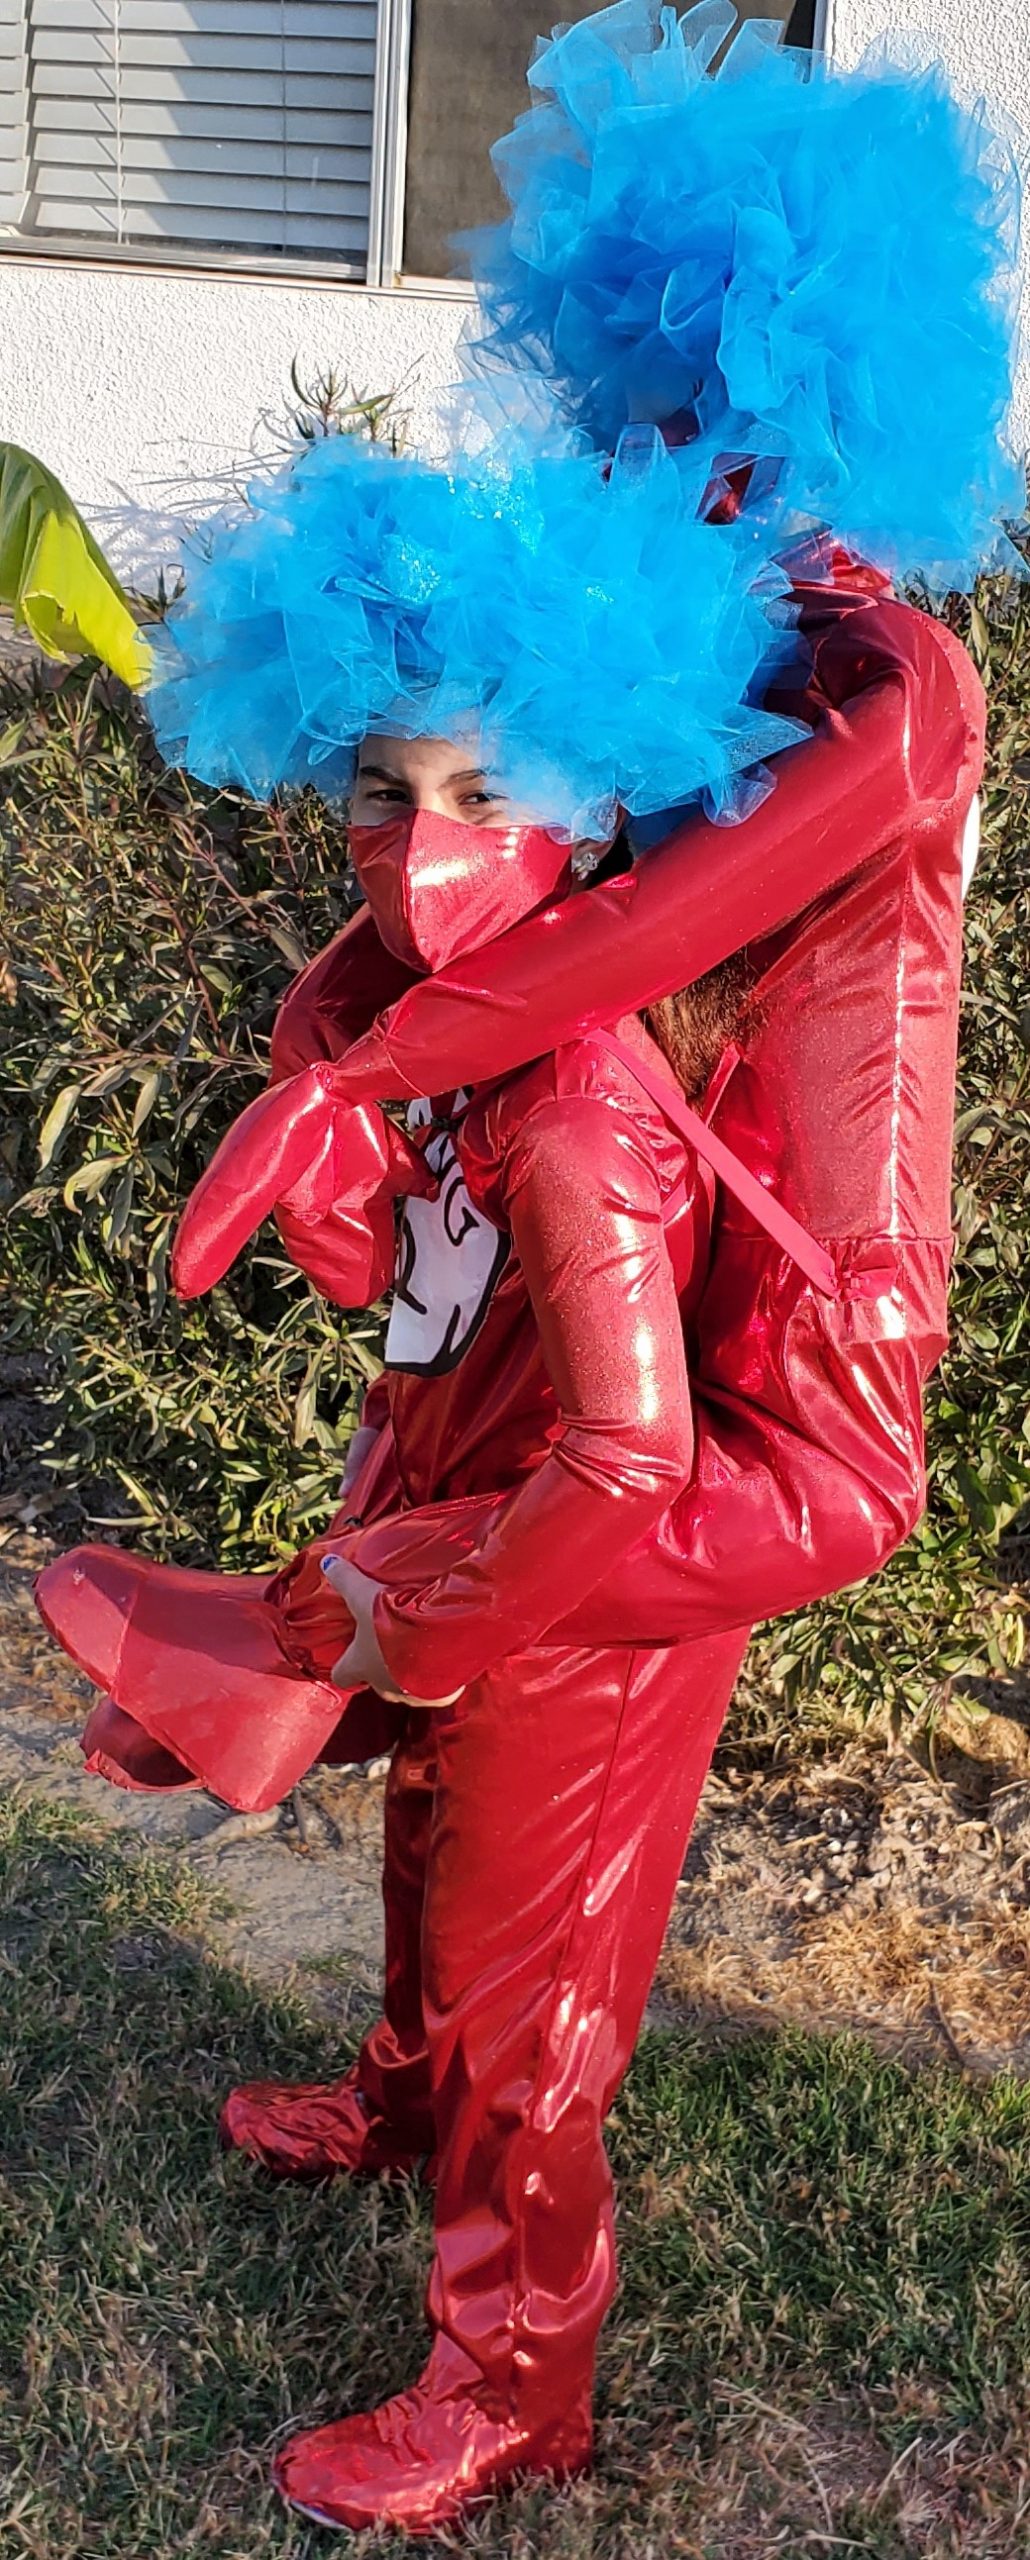 Homemade Thing 1 Costume and Thing 2